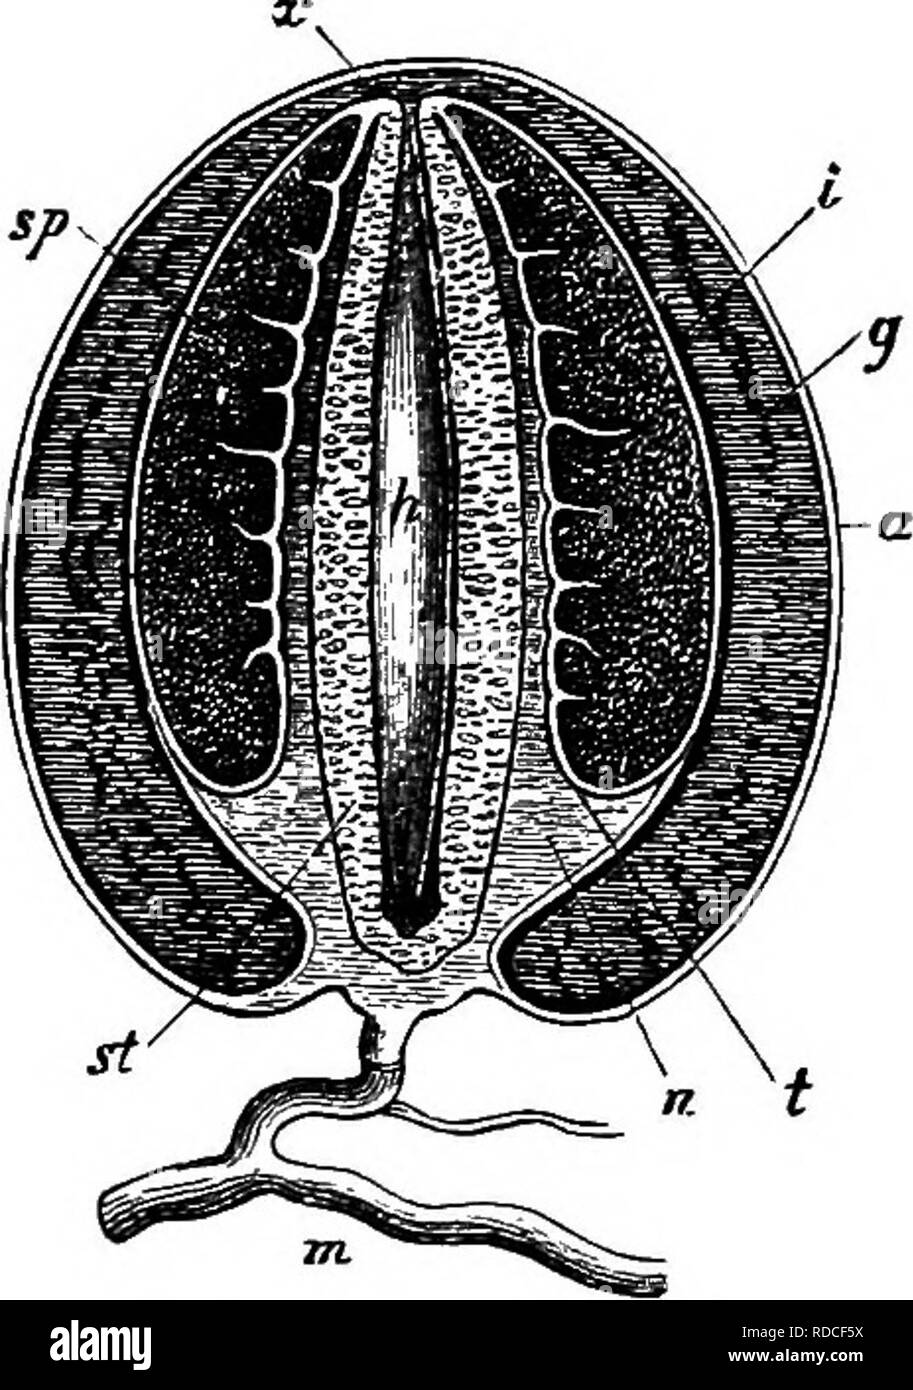 . Comparative morphology and biology of the fungi, mycetozoa and bacteria . Plant morphology; Fungi; Myxomycetes; Bacteriology. Fig. 153. Phallus cnninus. Young sporophore partly attached to the myccliuni ni in median longitudinal section and natural size. Succession of stages of development according to the letters u—y. y a specimen not fully grown but with ripe spores; a the outer wail, i the inner wall, g the gelatinous layer of the peridium, b the bas,-il portion, k the cone, s the stipe, sb the gleba.. HIG. 154. Phallus impiidiciis. A nearly ituiture example before the elongation of the s Stock Photo